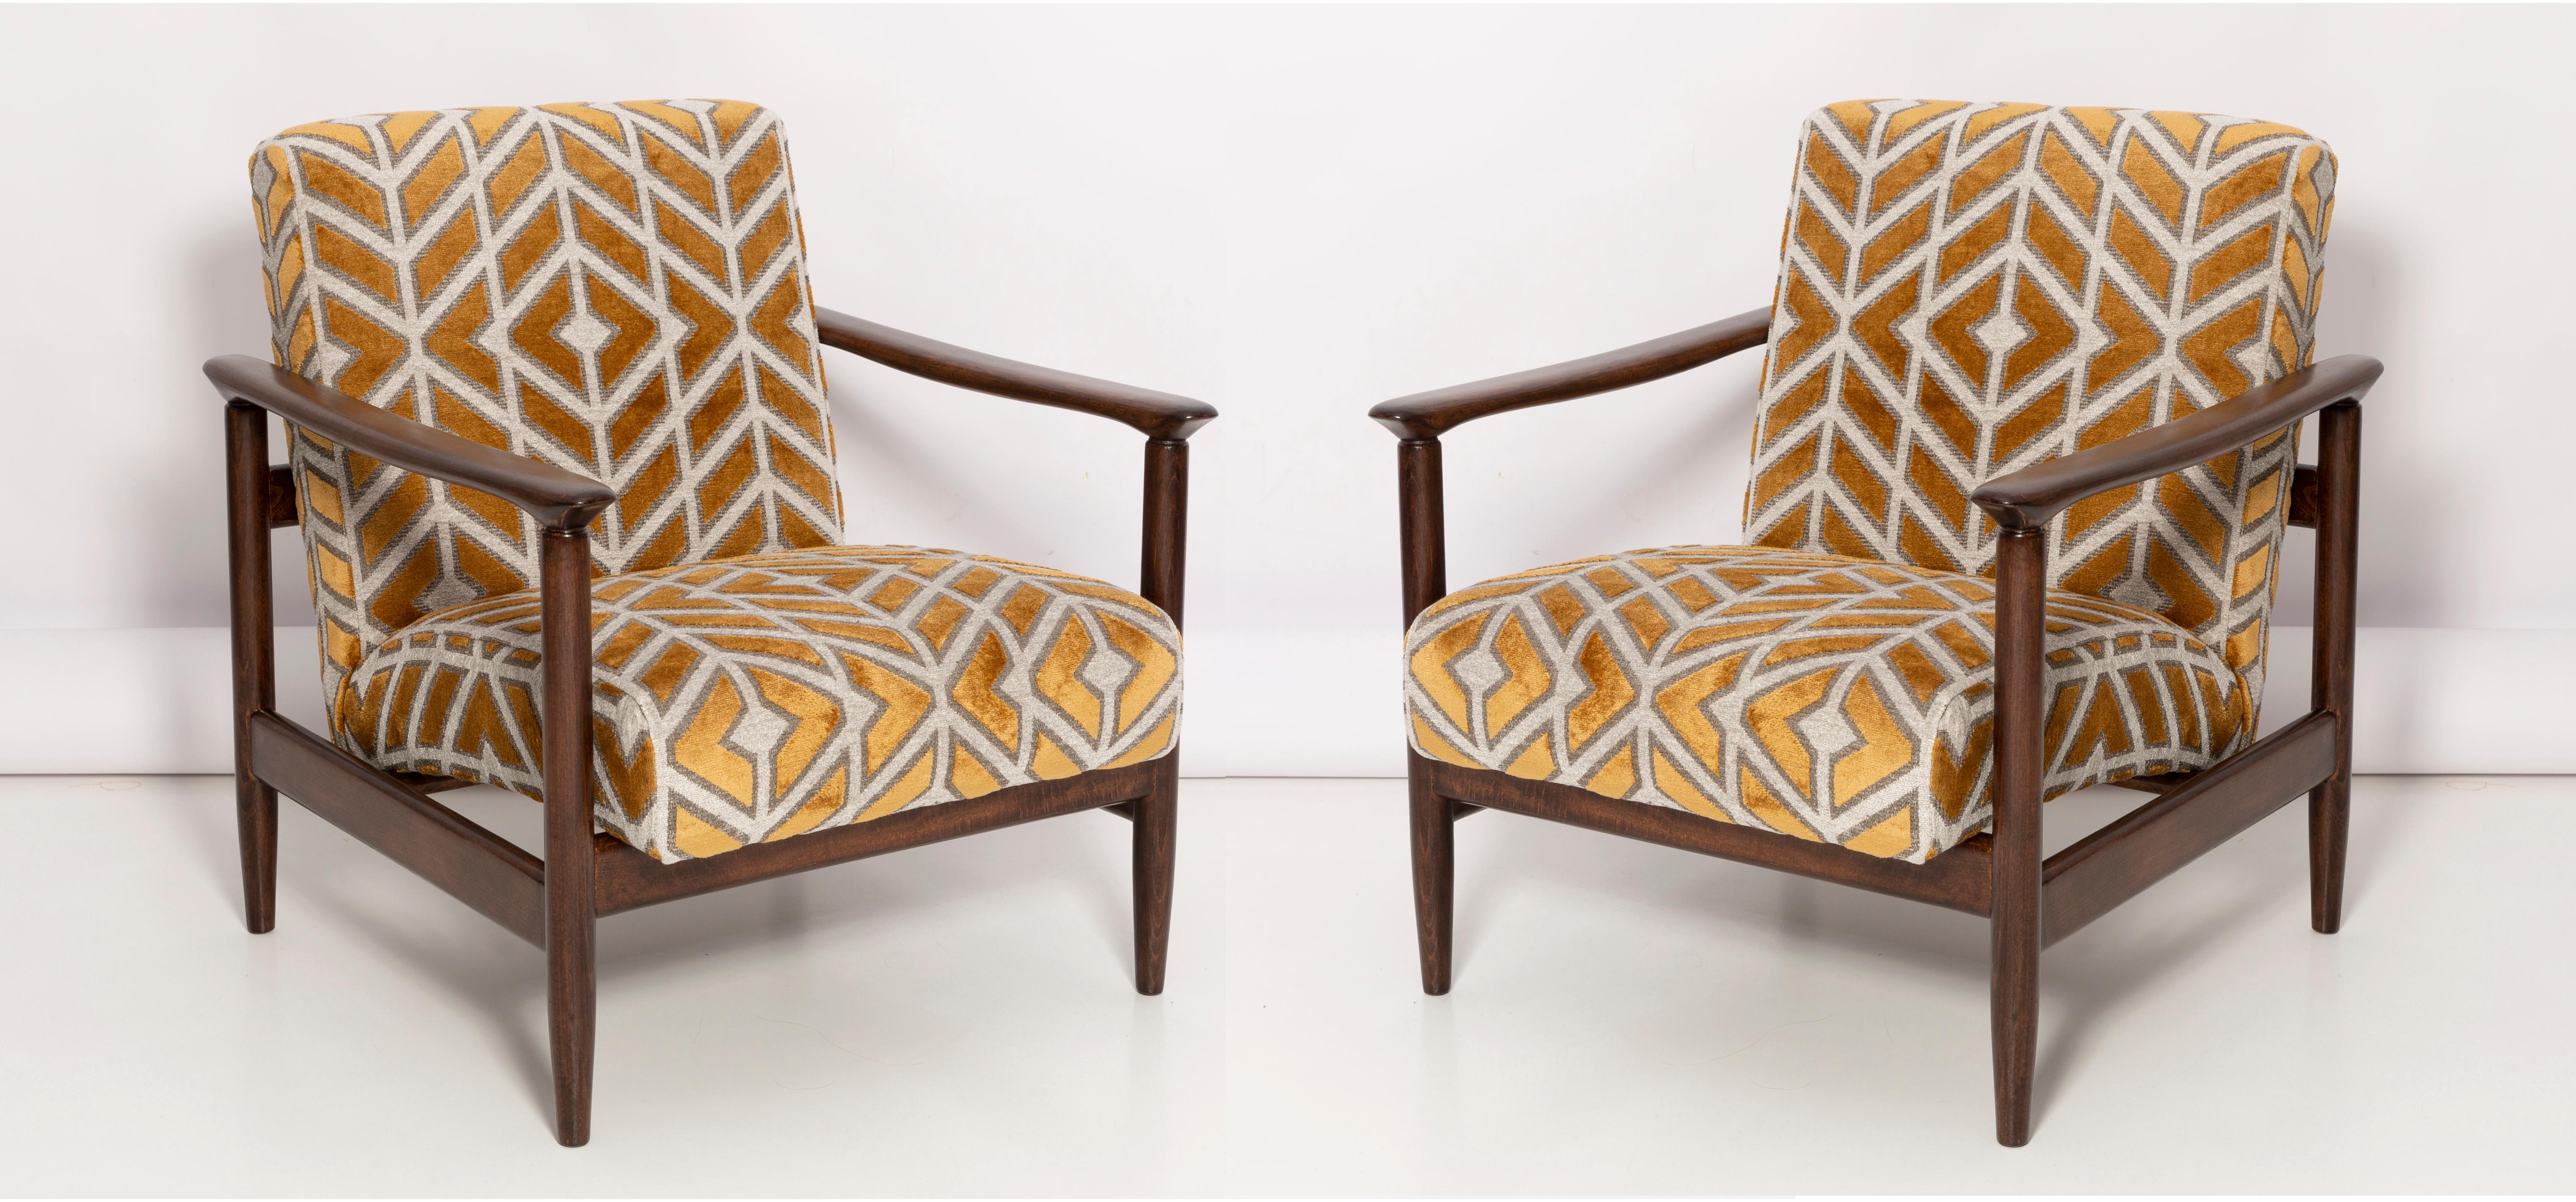 A pair of armchairs GFM-142, designed by Edmund Homa. The armchairs were made in the 1960s in the Gosciecinska Furniture Factory. They are made from solid beechwood. The GFM-142 armchair is regarded one of the best polish armchair design from the